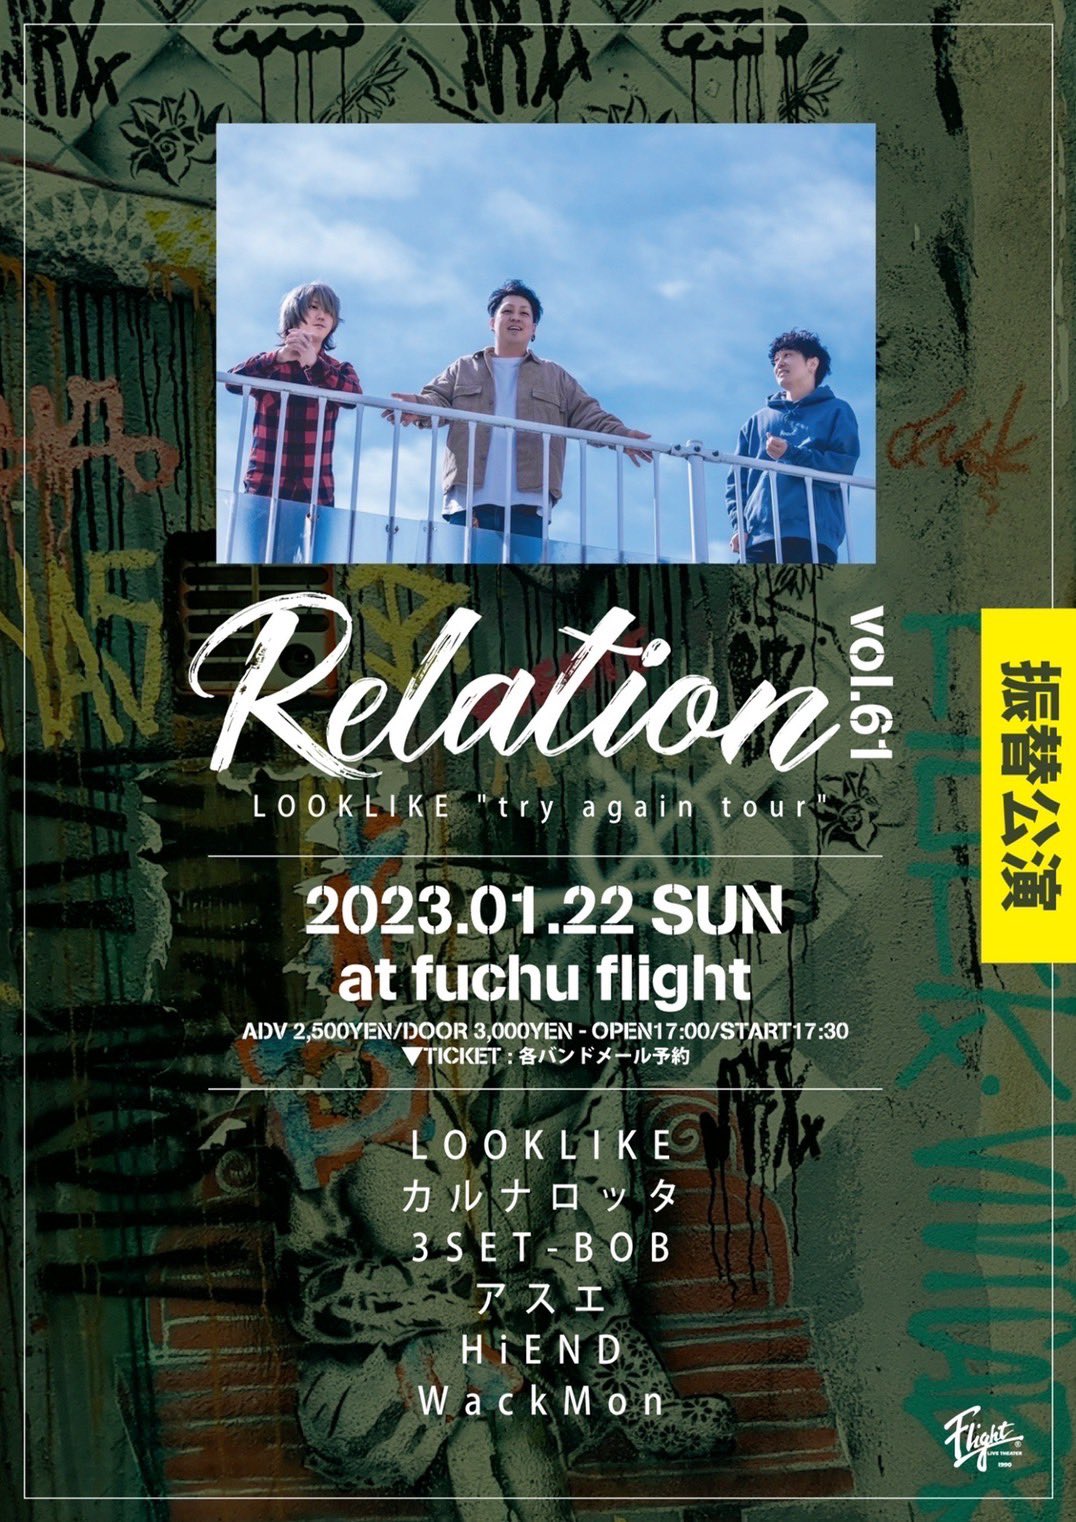 Relation vol.61-振替公演-LOOKLIKE try again tour